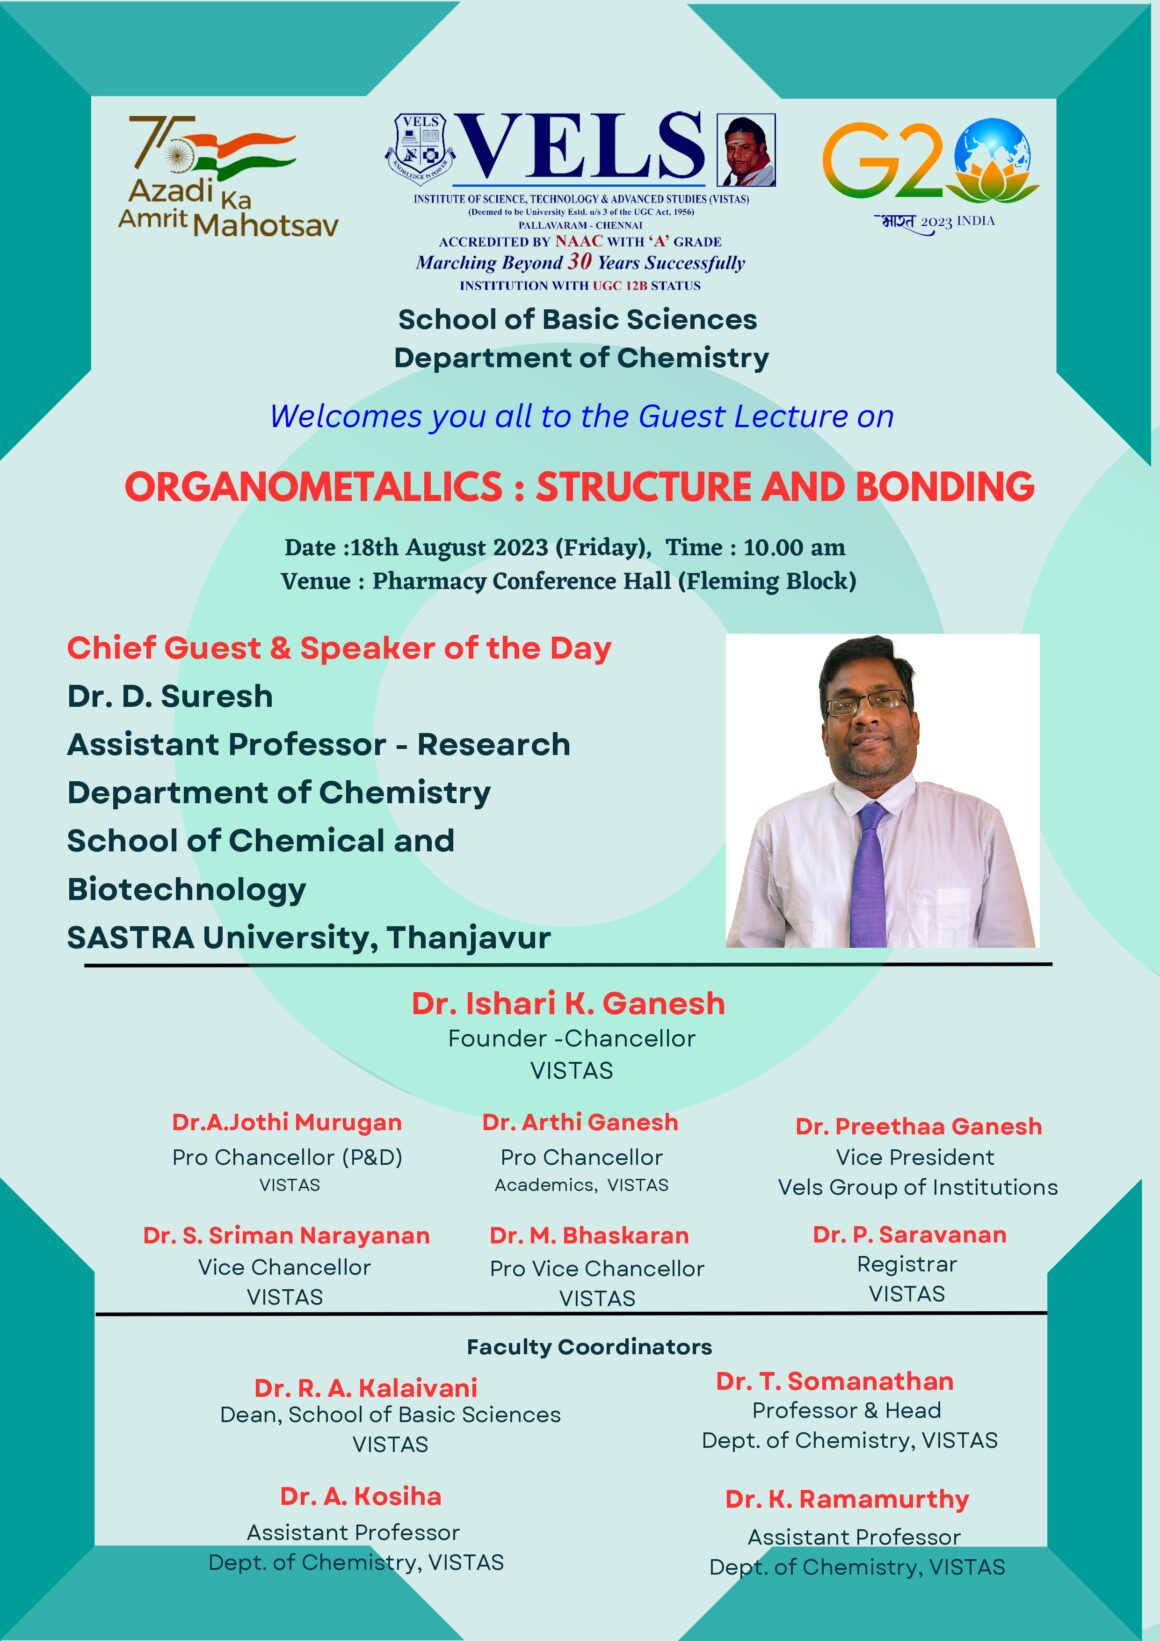 Guest Lecture on ORGANOMETALLICS : STRUCTURE AND BONDING